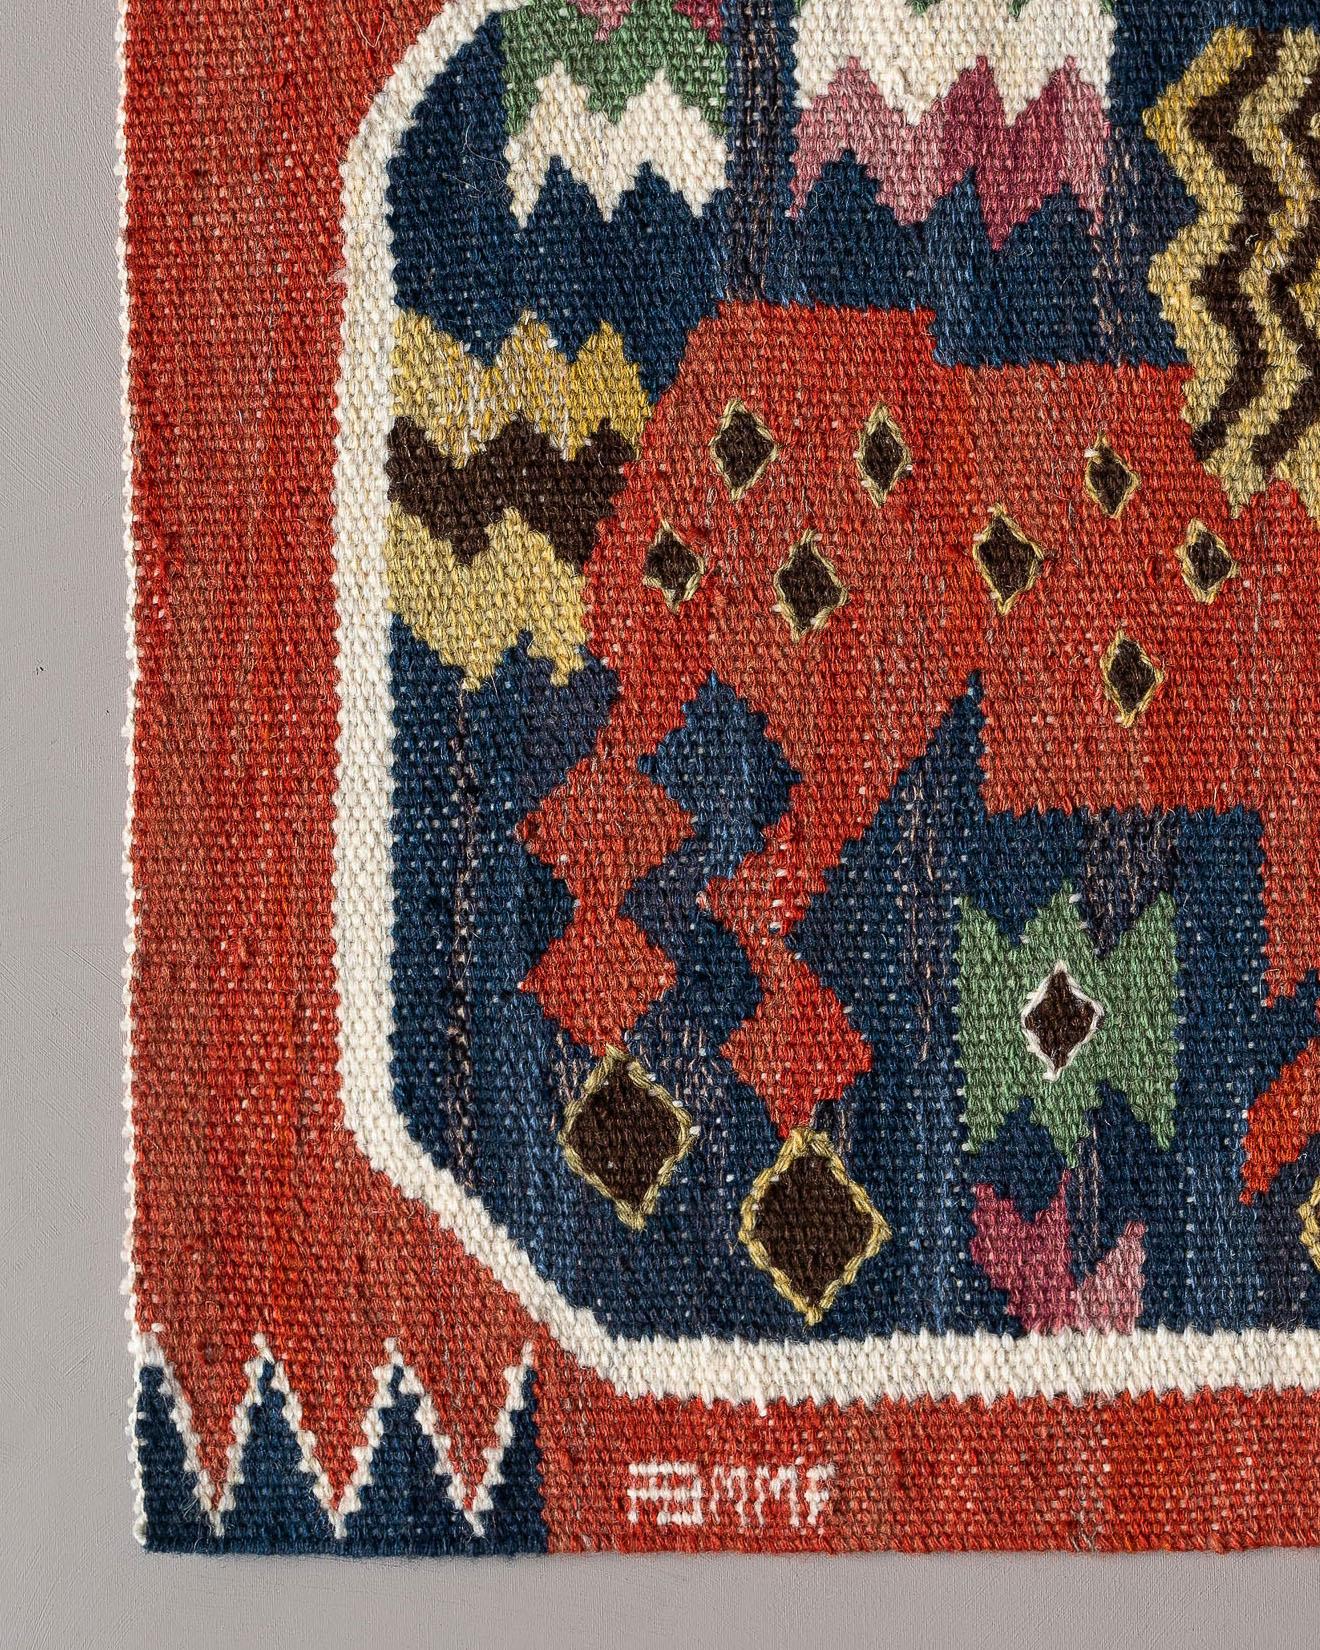 Handwoven tapestry in wool with motif of a red horse, designed by Märta Måås-Fjetterström in 1930. 

Several horses with different poses appears in the collection of red horses by MMF. They are details from the large wall tapestry Röda Hästarna,